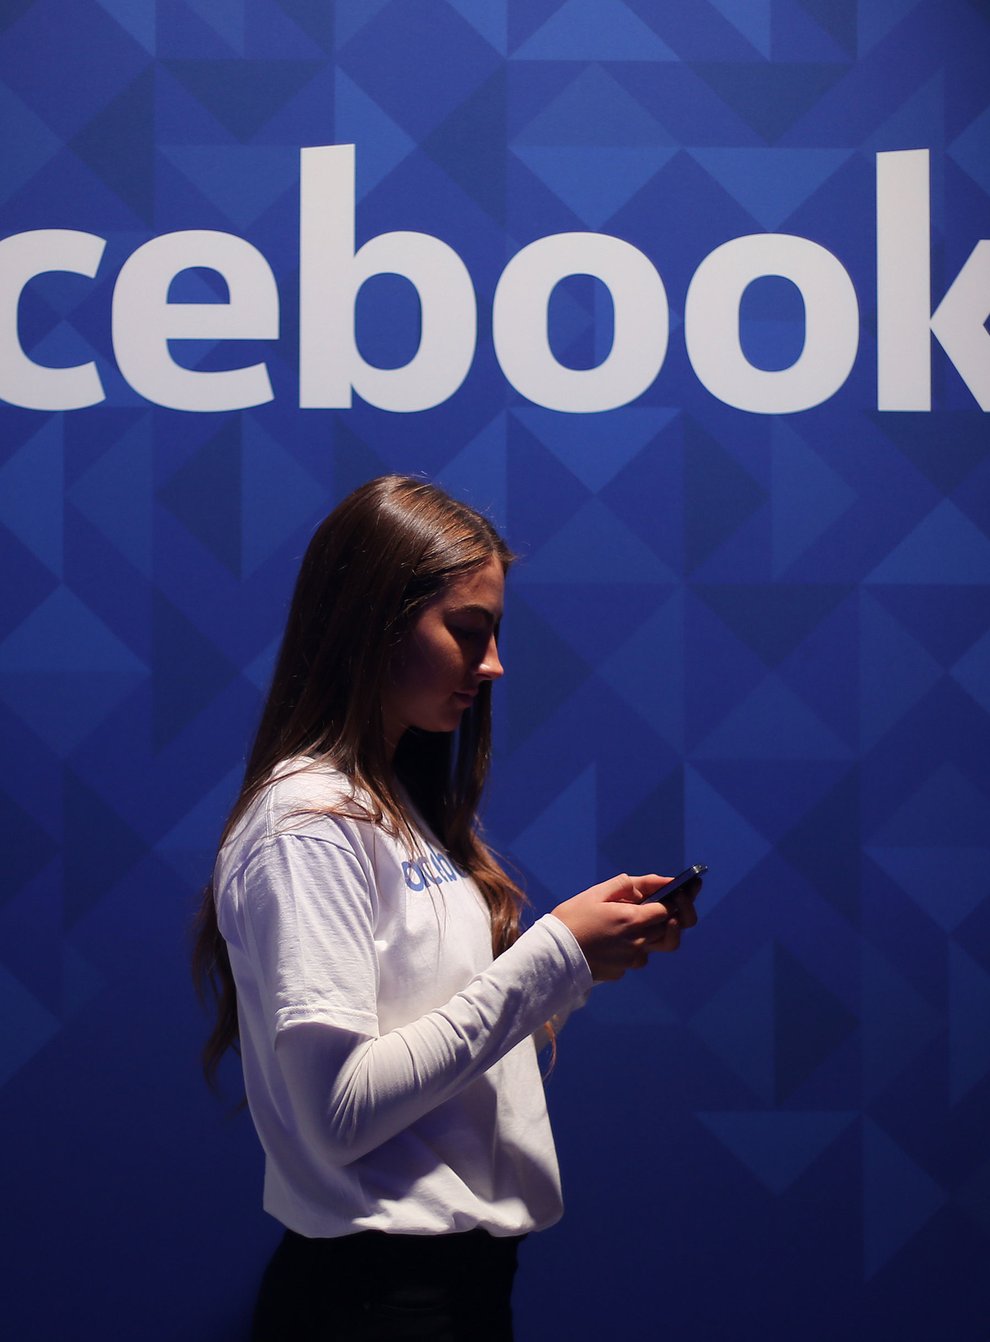 A woman looks at her smartphone in front of a Facebook logo